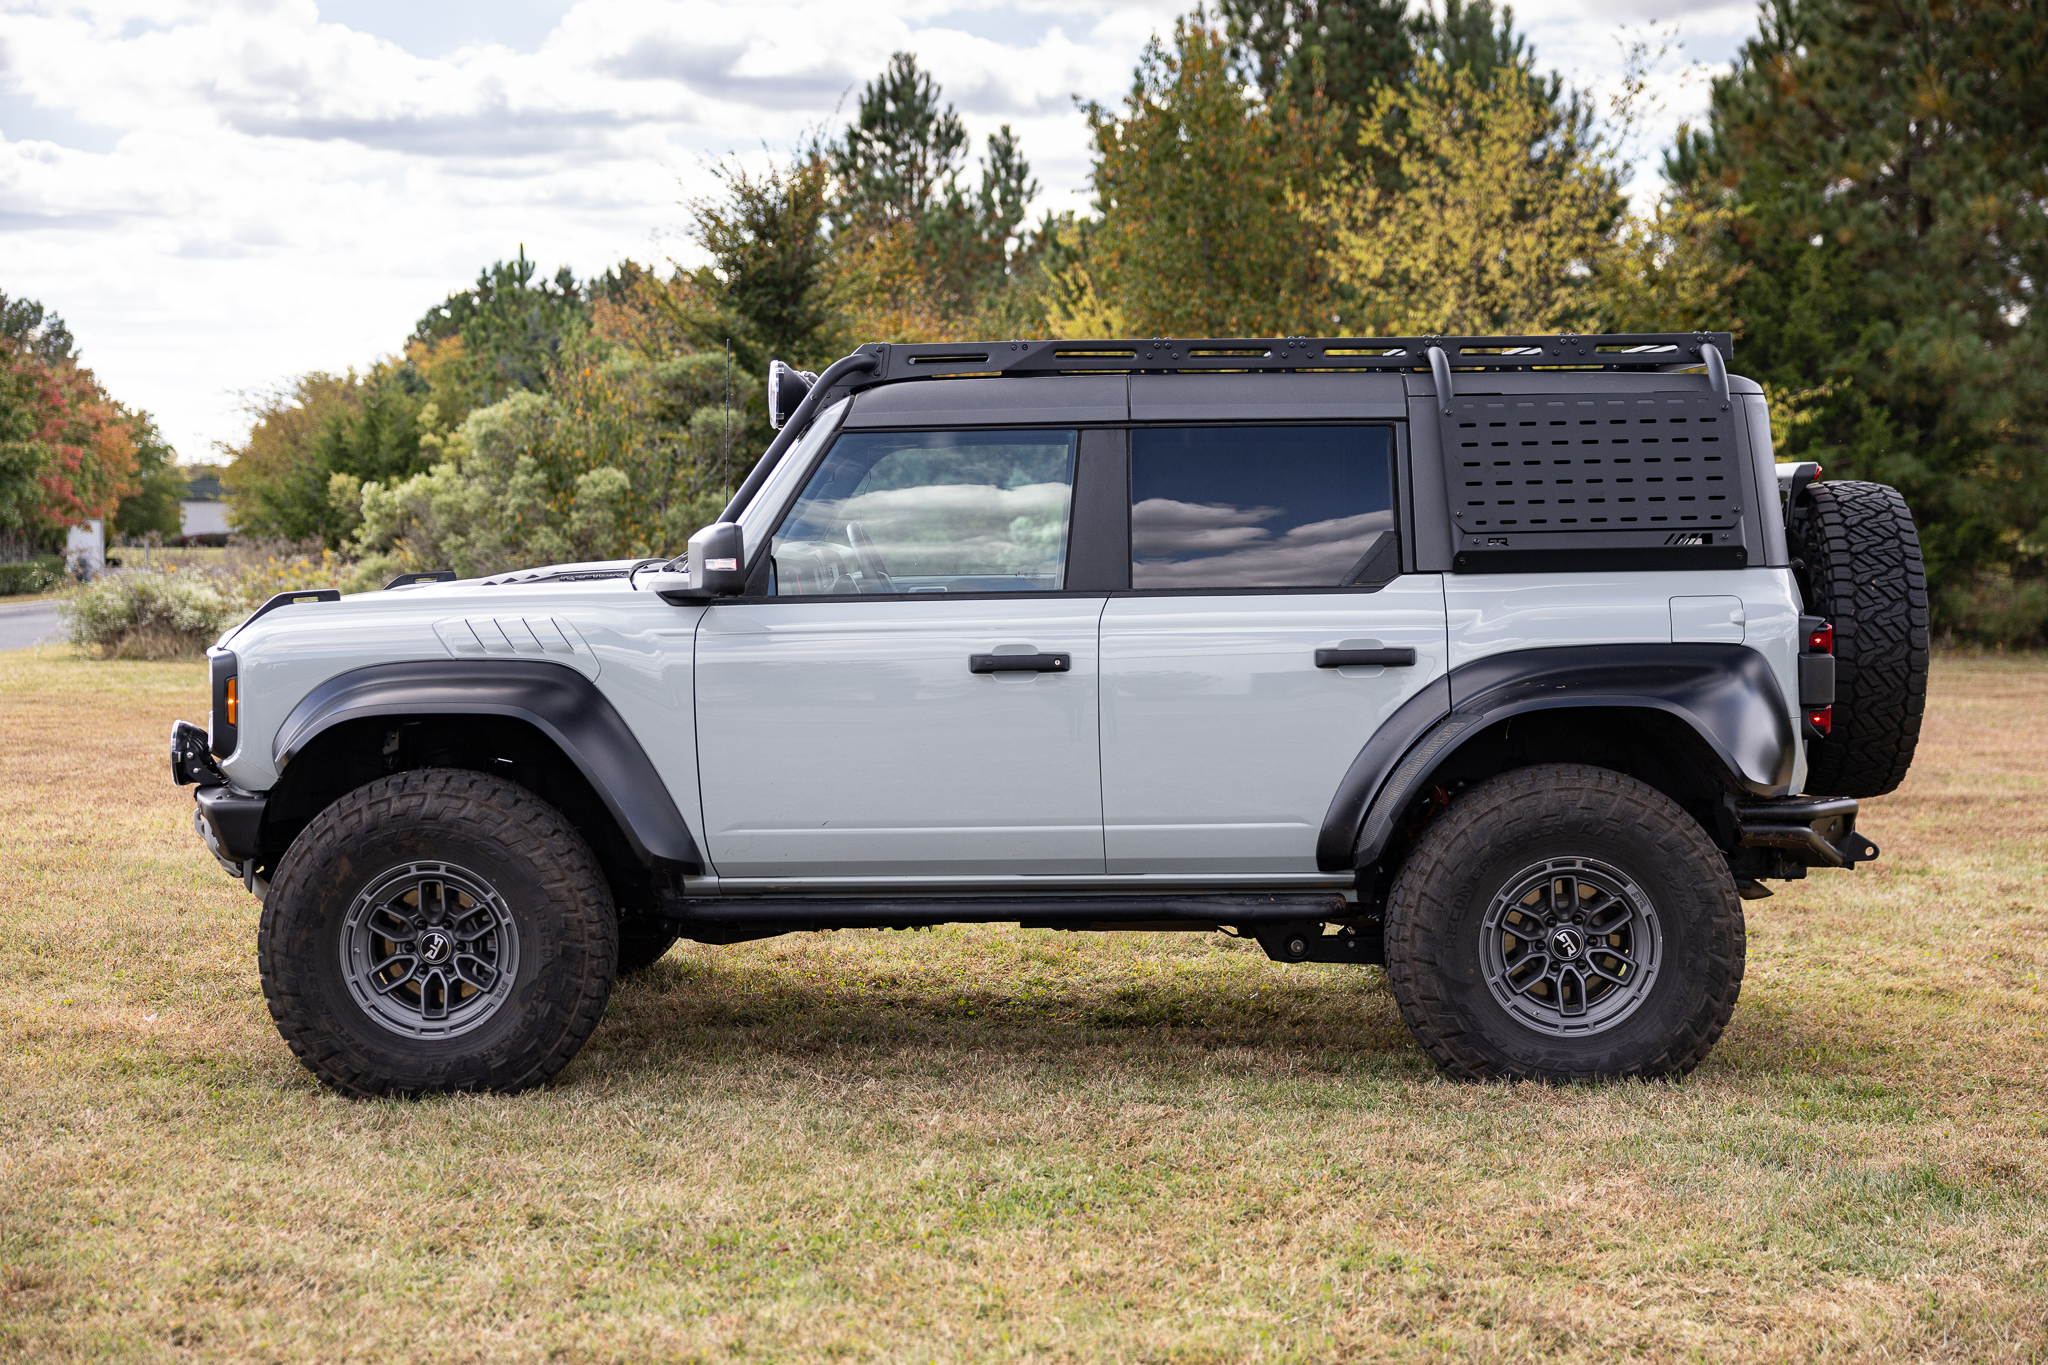 Ford Bronco Modular Roof Rack for 4-door, hard or soft top, Ford Bronco from RTR Vehicles! JCOL9168